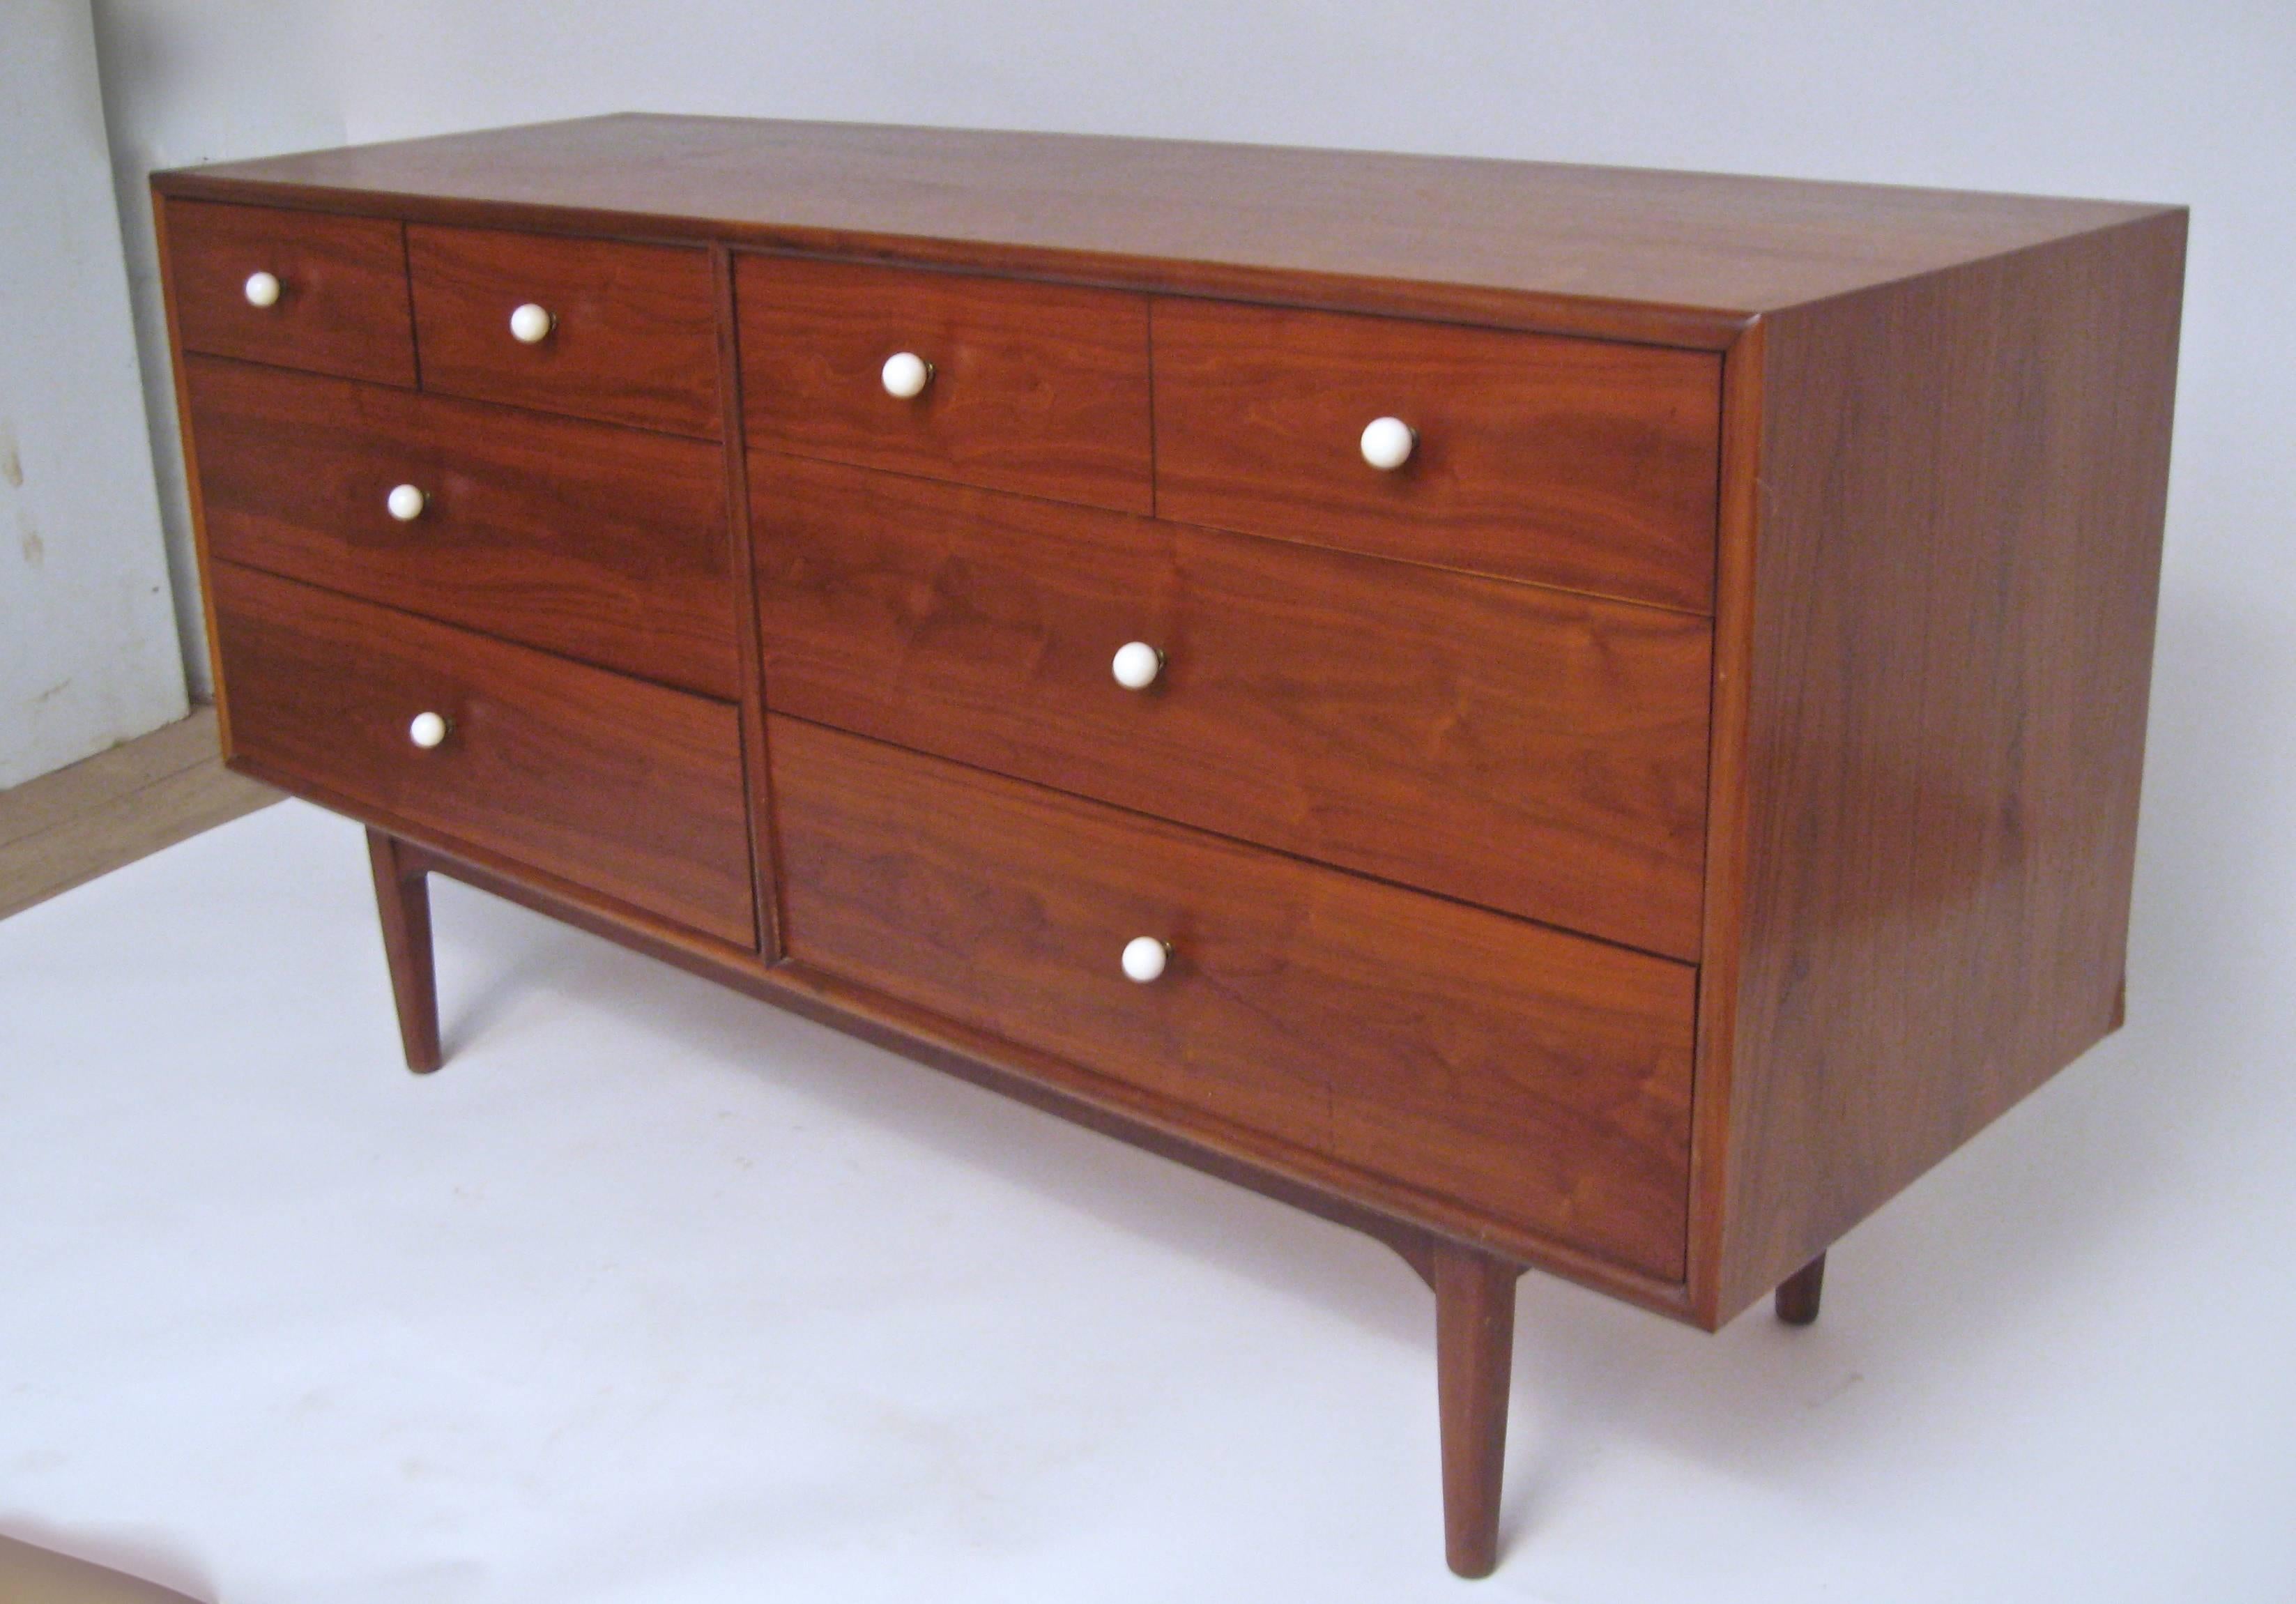 Declaration for Drexel series designed by Kipp Stewart and Stewart McDougall. Made of wonderfully figured solid and walnut veneers. Tapered legs. Small plastic caddy for jewelry, tie clips, cuff links, etc. Round white porcelain knobs. Original low